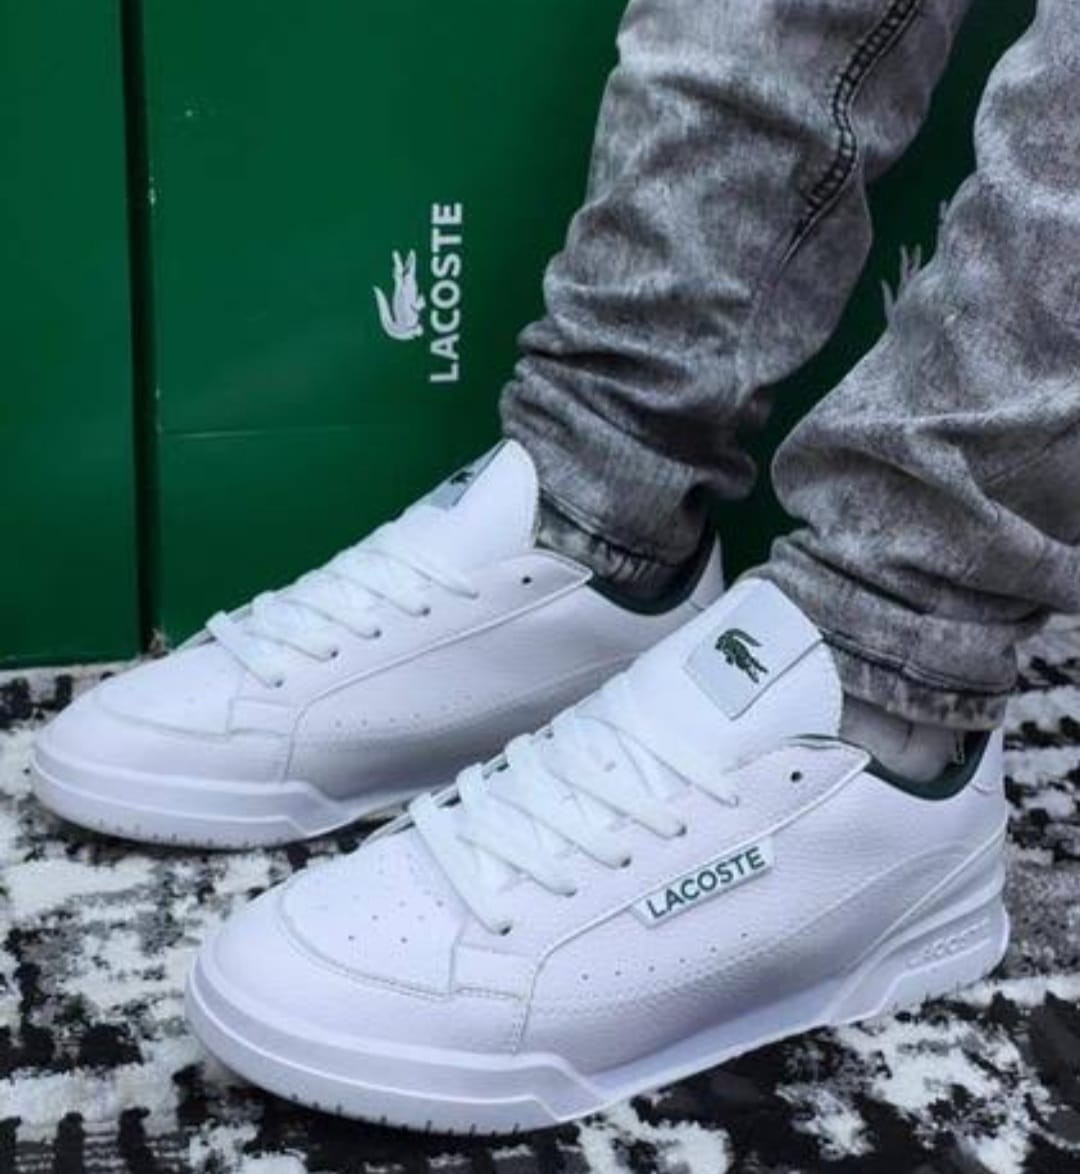 Wengie Laceup (Lacoste)